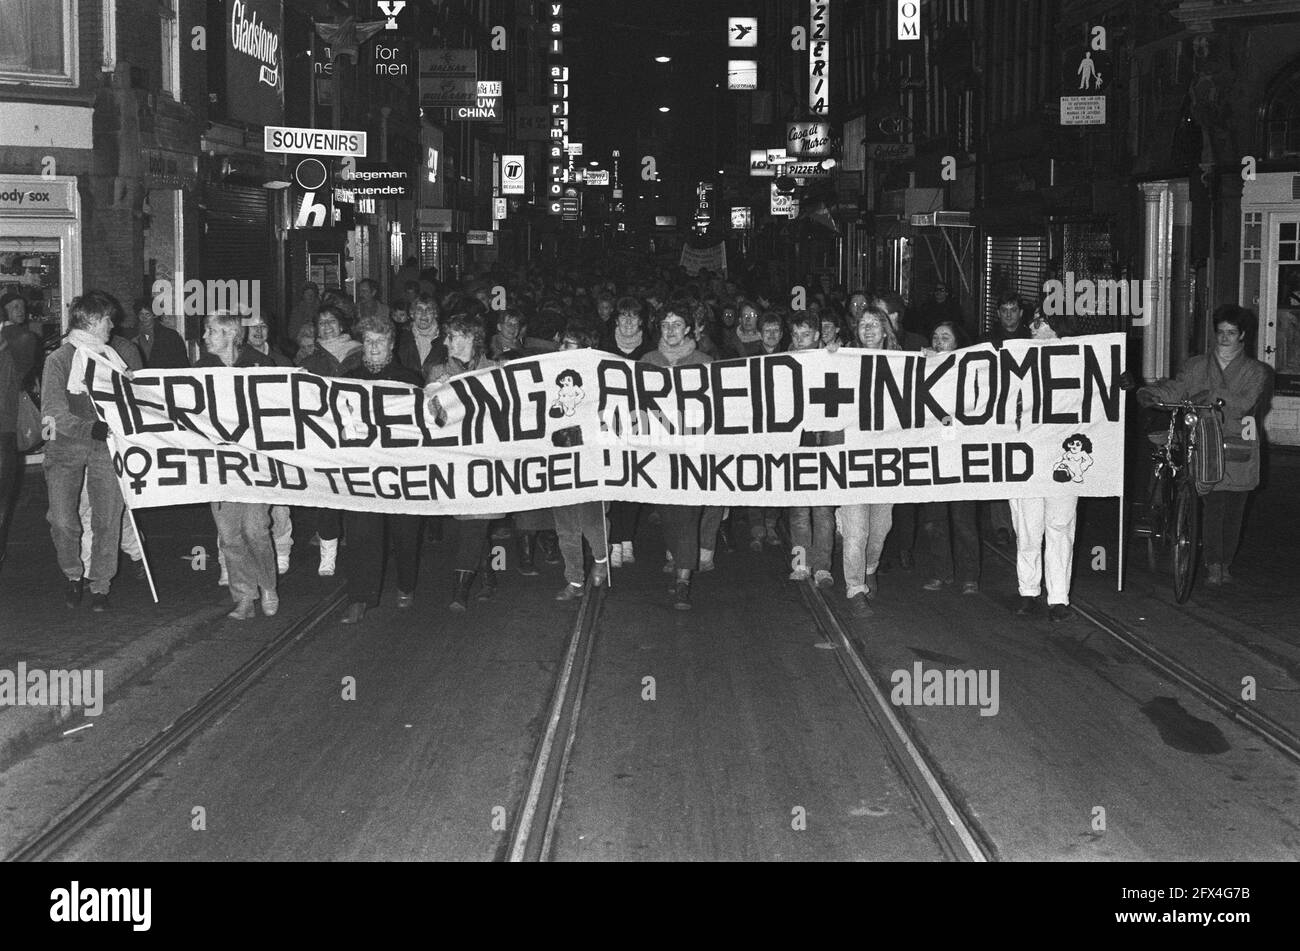 Demonstration in Amsterdam on the theme of work and income, March 8, 1986, Demonstration, women, women's emancipation, The Netherlands, 20th century press agency photo, news to remember, documentary, historic photography 1945-1990, visual stories, human history of the Twentieth Century, capturing moments in time Stock Photo